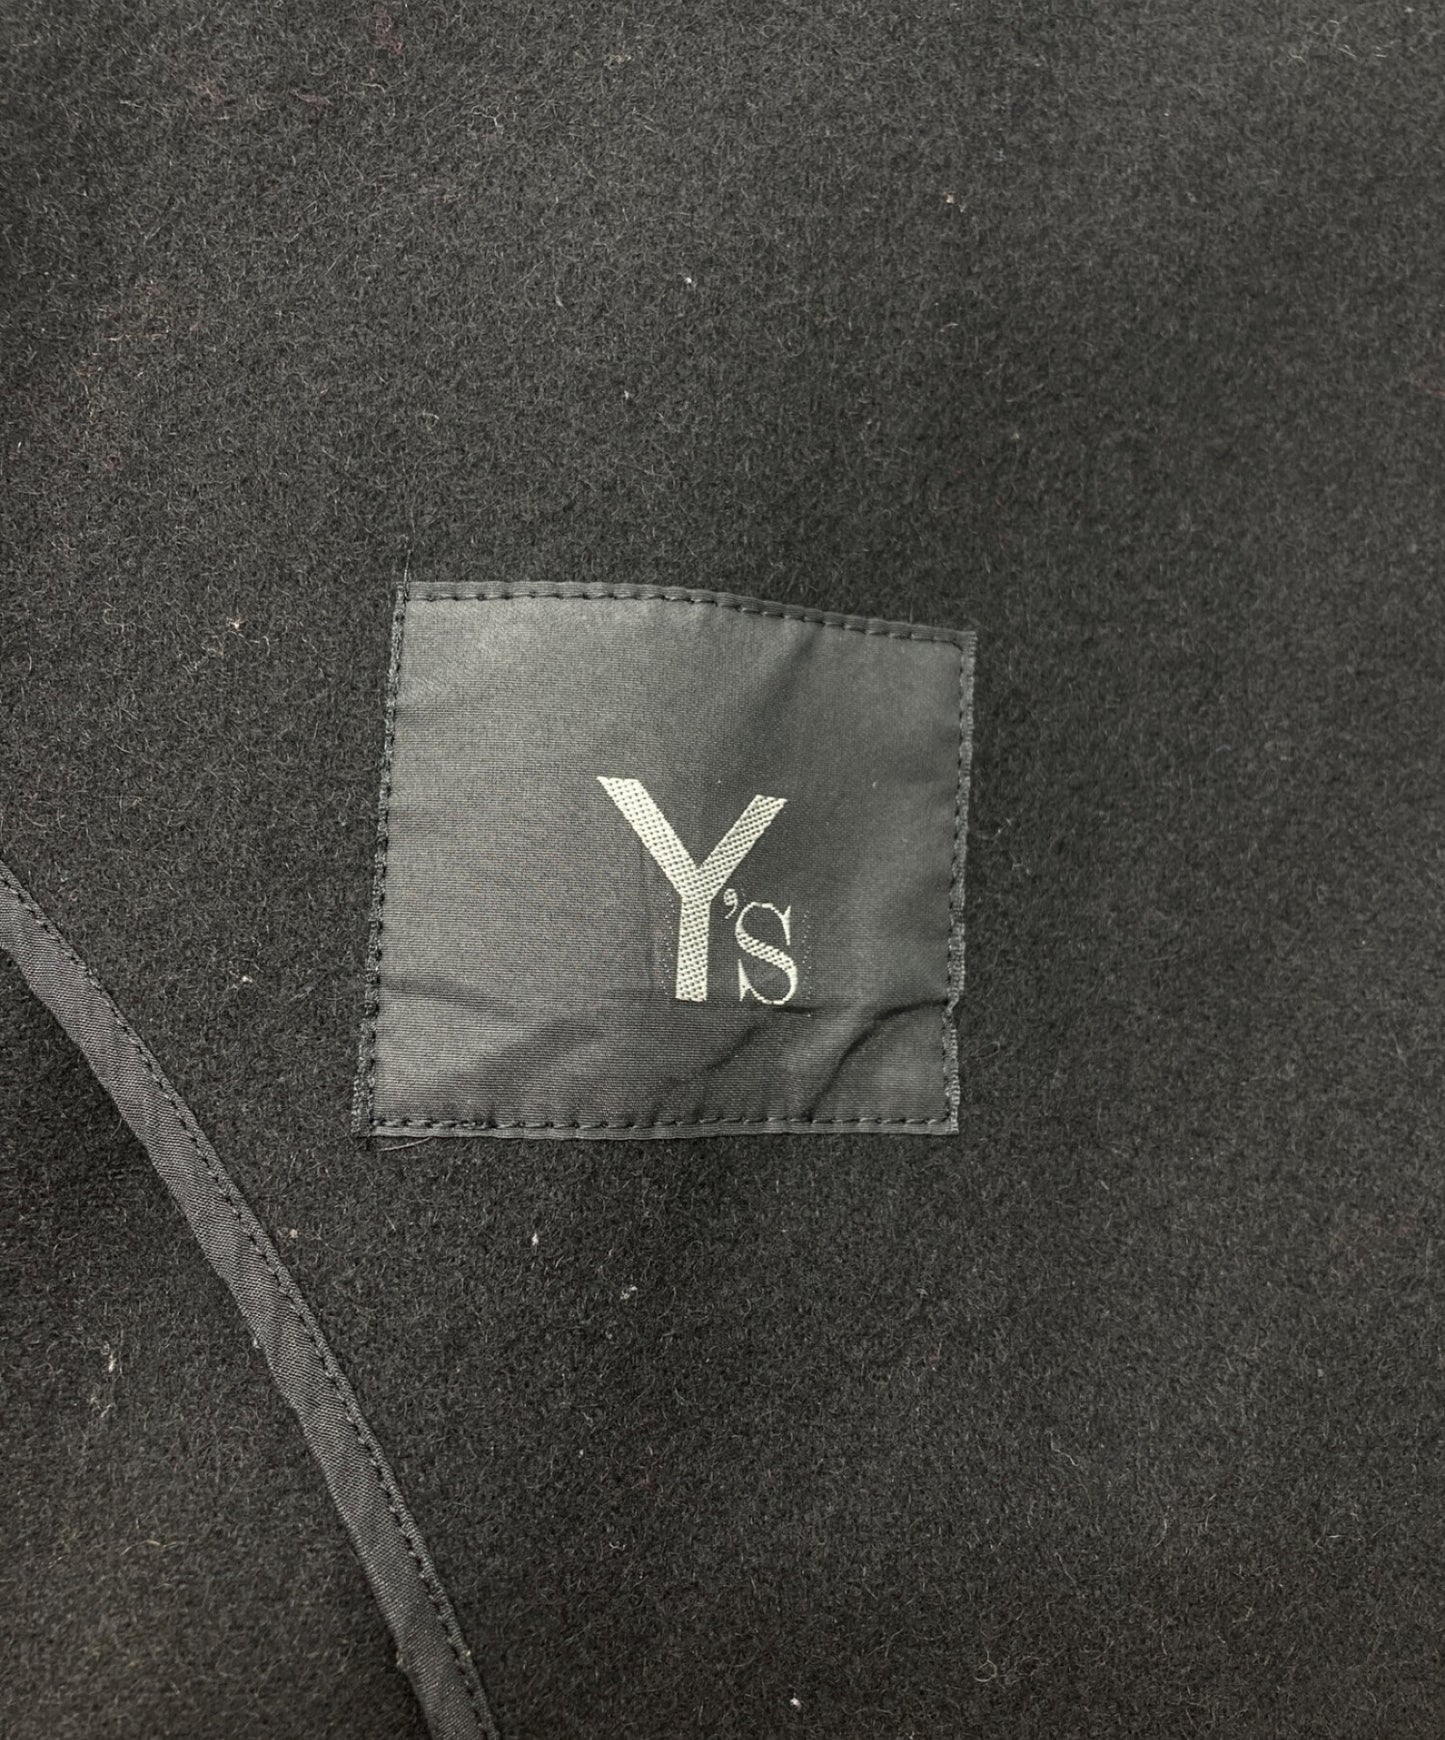 [Pre-owned] Y's Wool stand collar coat 1003